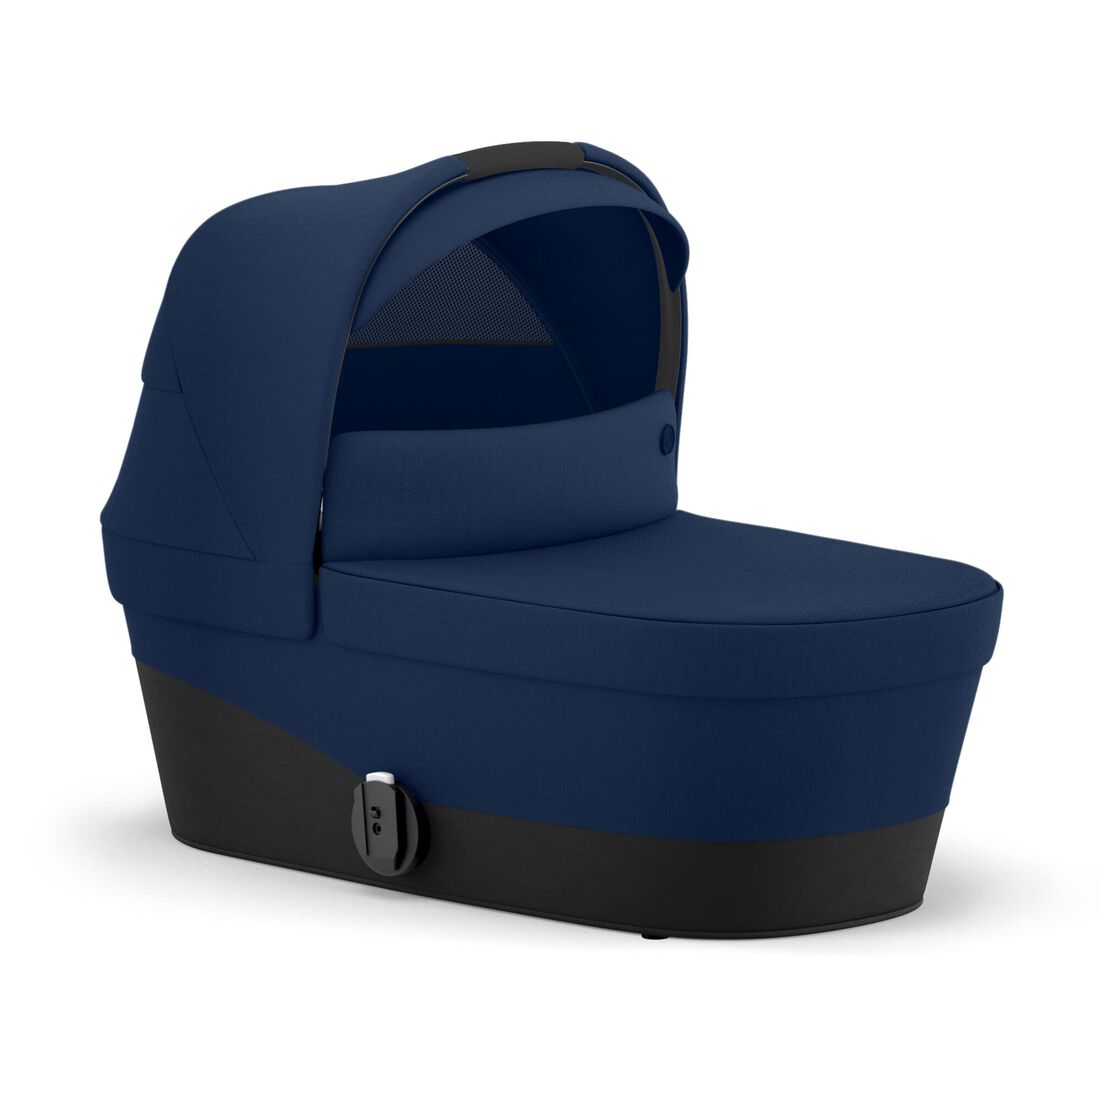 CYBEX Gazelle S Navicella Cot - Navy Blue in Navy Blue large numero immagine 1